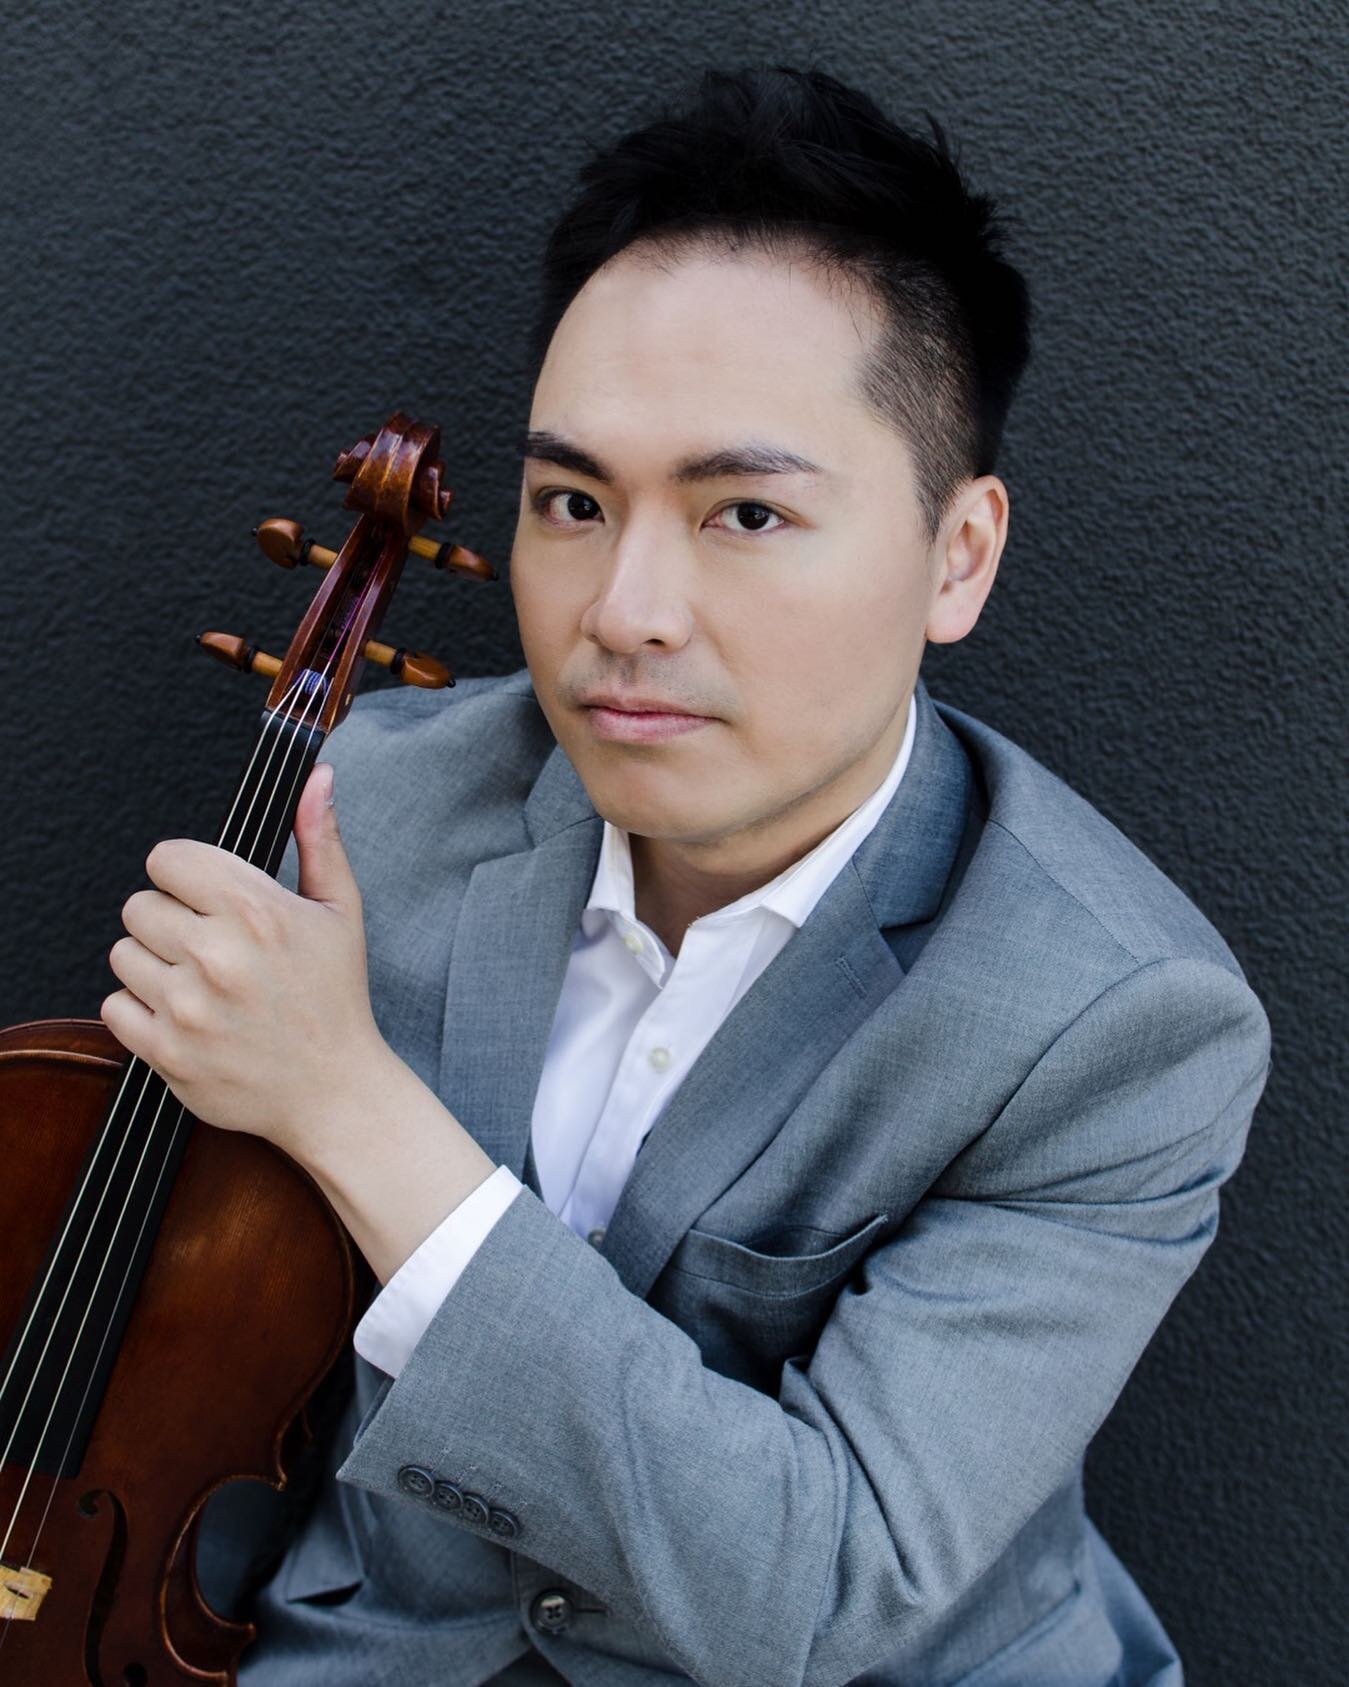 -
Meet the Musician of the Lenox Hill: Andy Lin

Taiwanese born violist and erhuist (Chinese violin), Wei-Yang Andy Lin, is recognized as one of the most promising and the only active performers who specialized in both western and eastern instruments